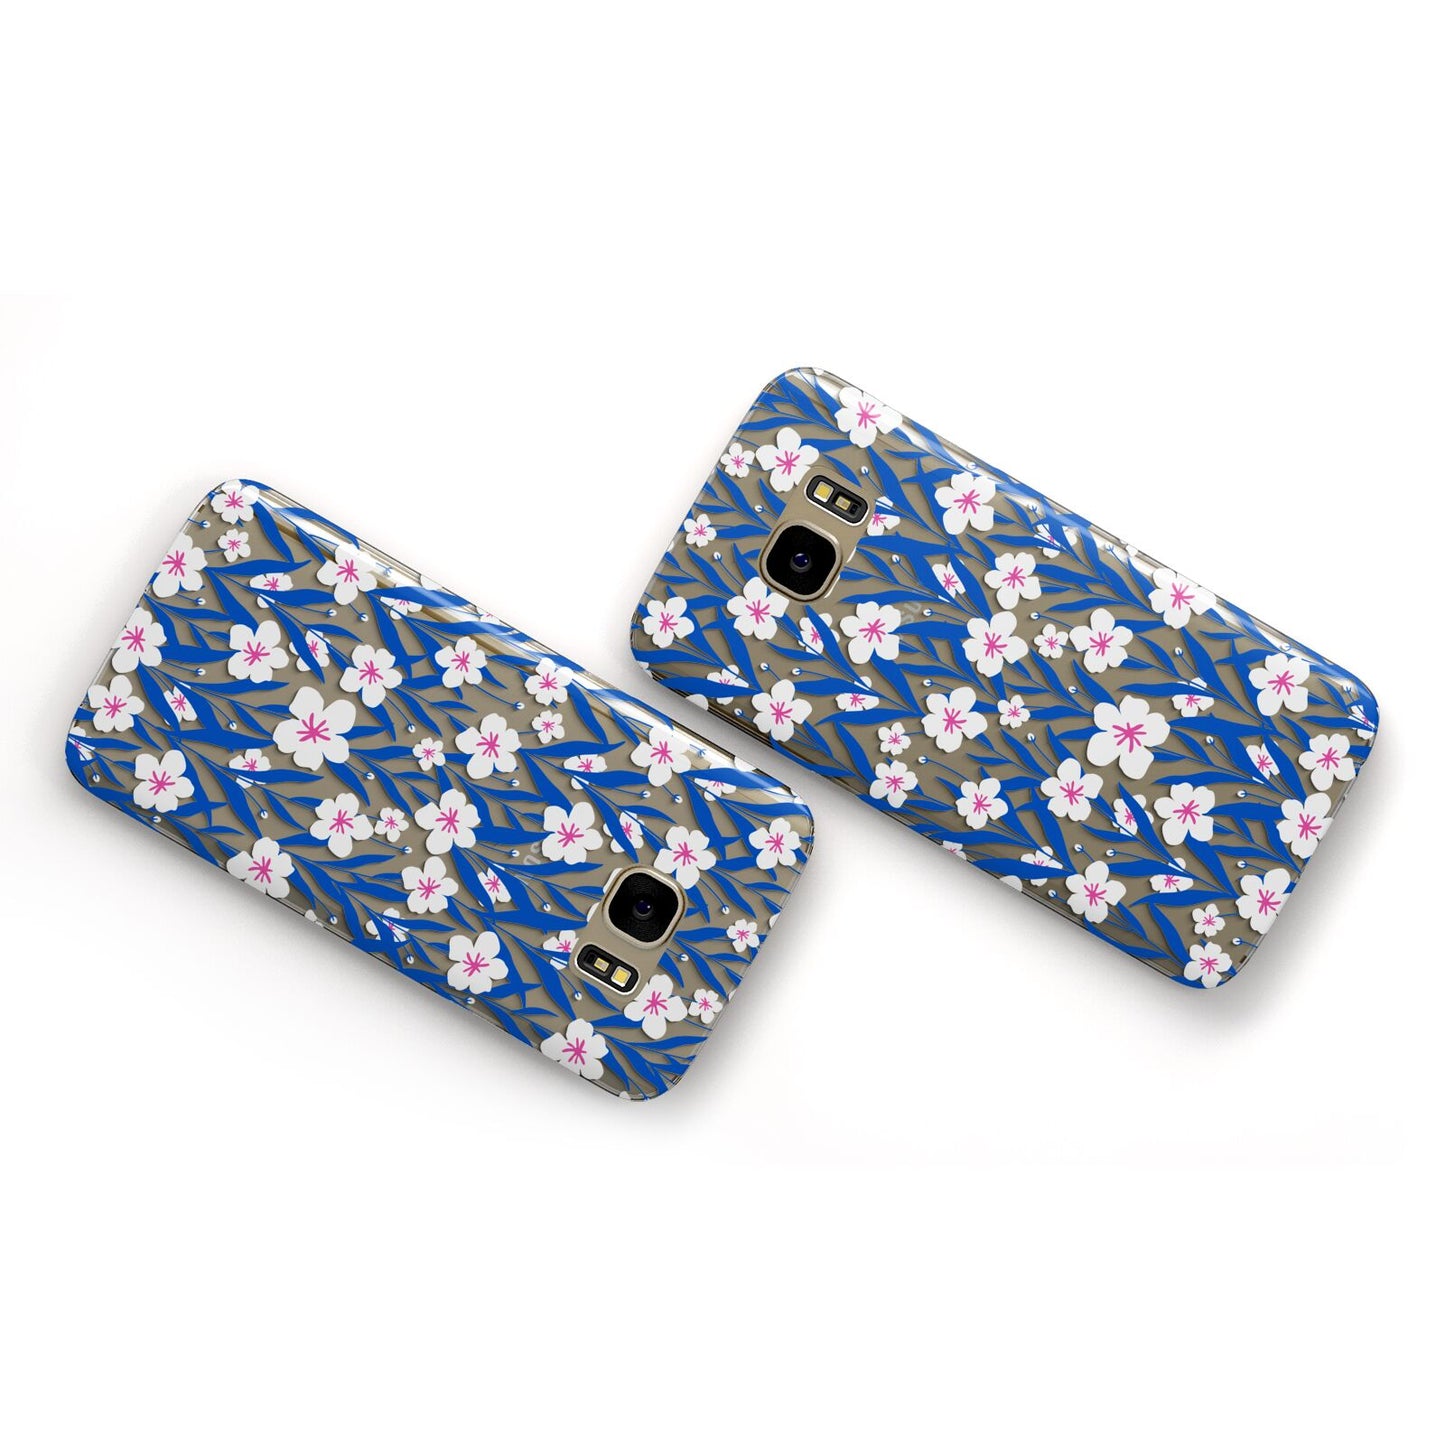 Blue and White Flowers Samsung Galaxy Case Flat Overview